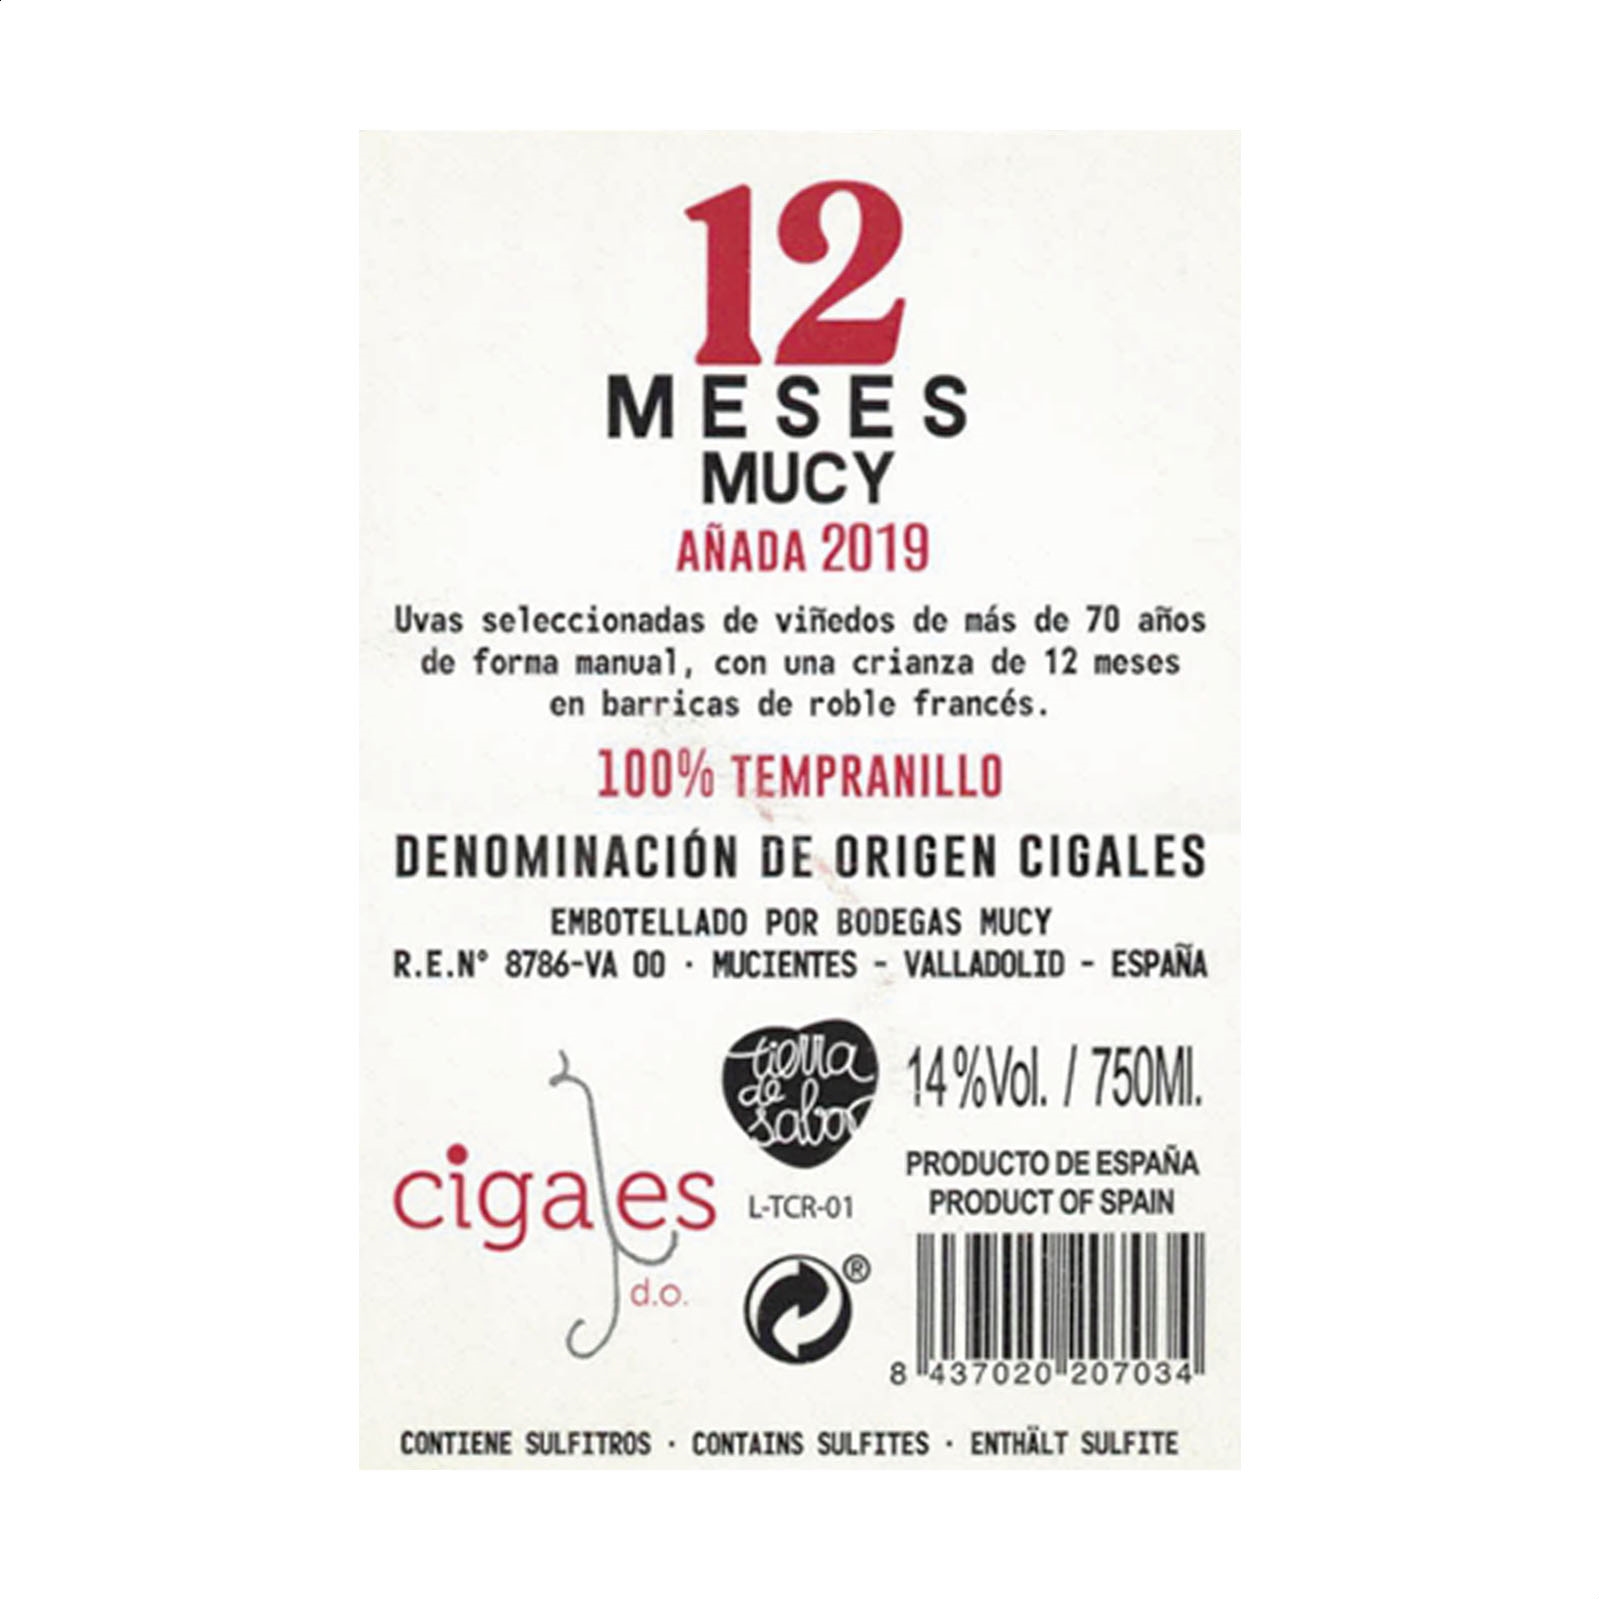 Bodegas Mucy - Vino tinto crianza D.O. Cigales 75cl, 3uds